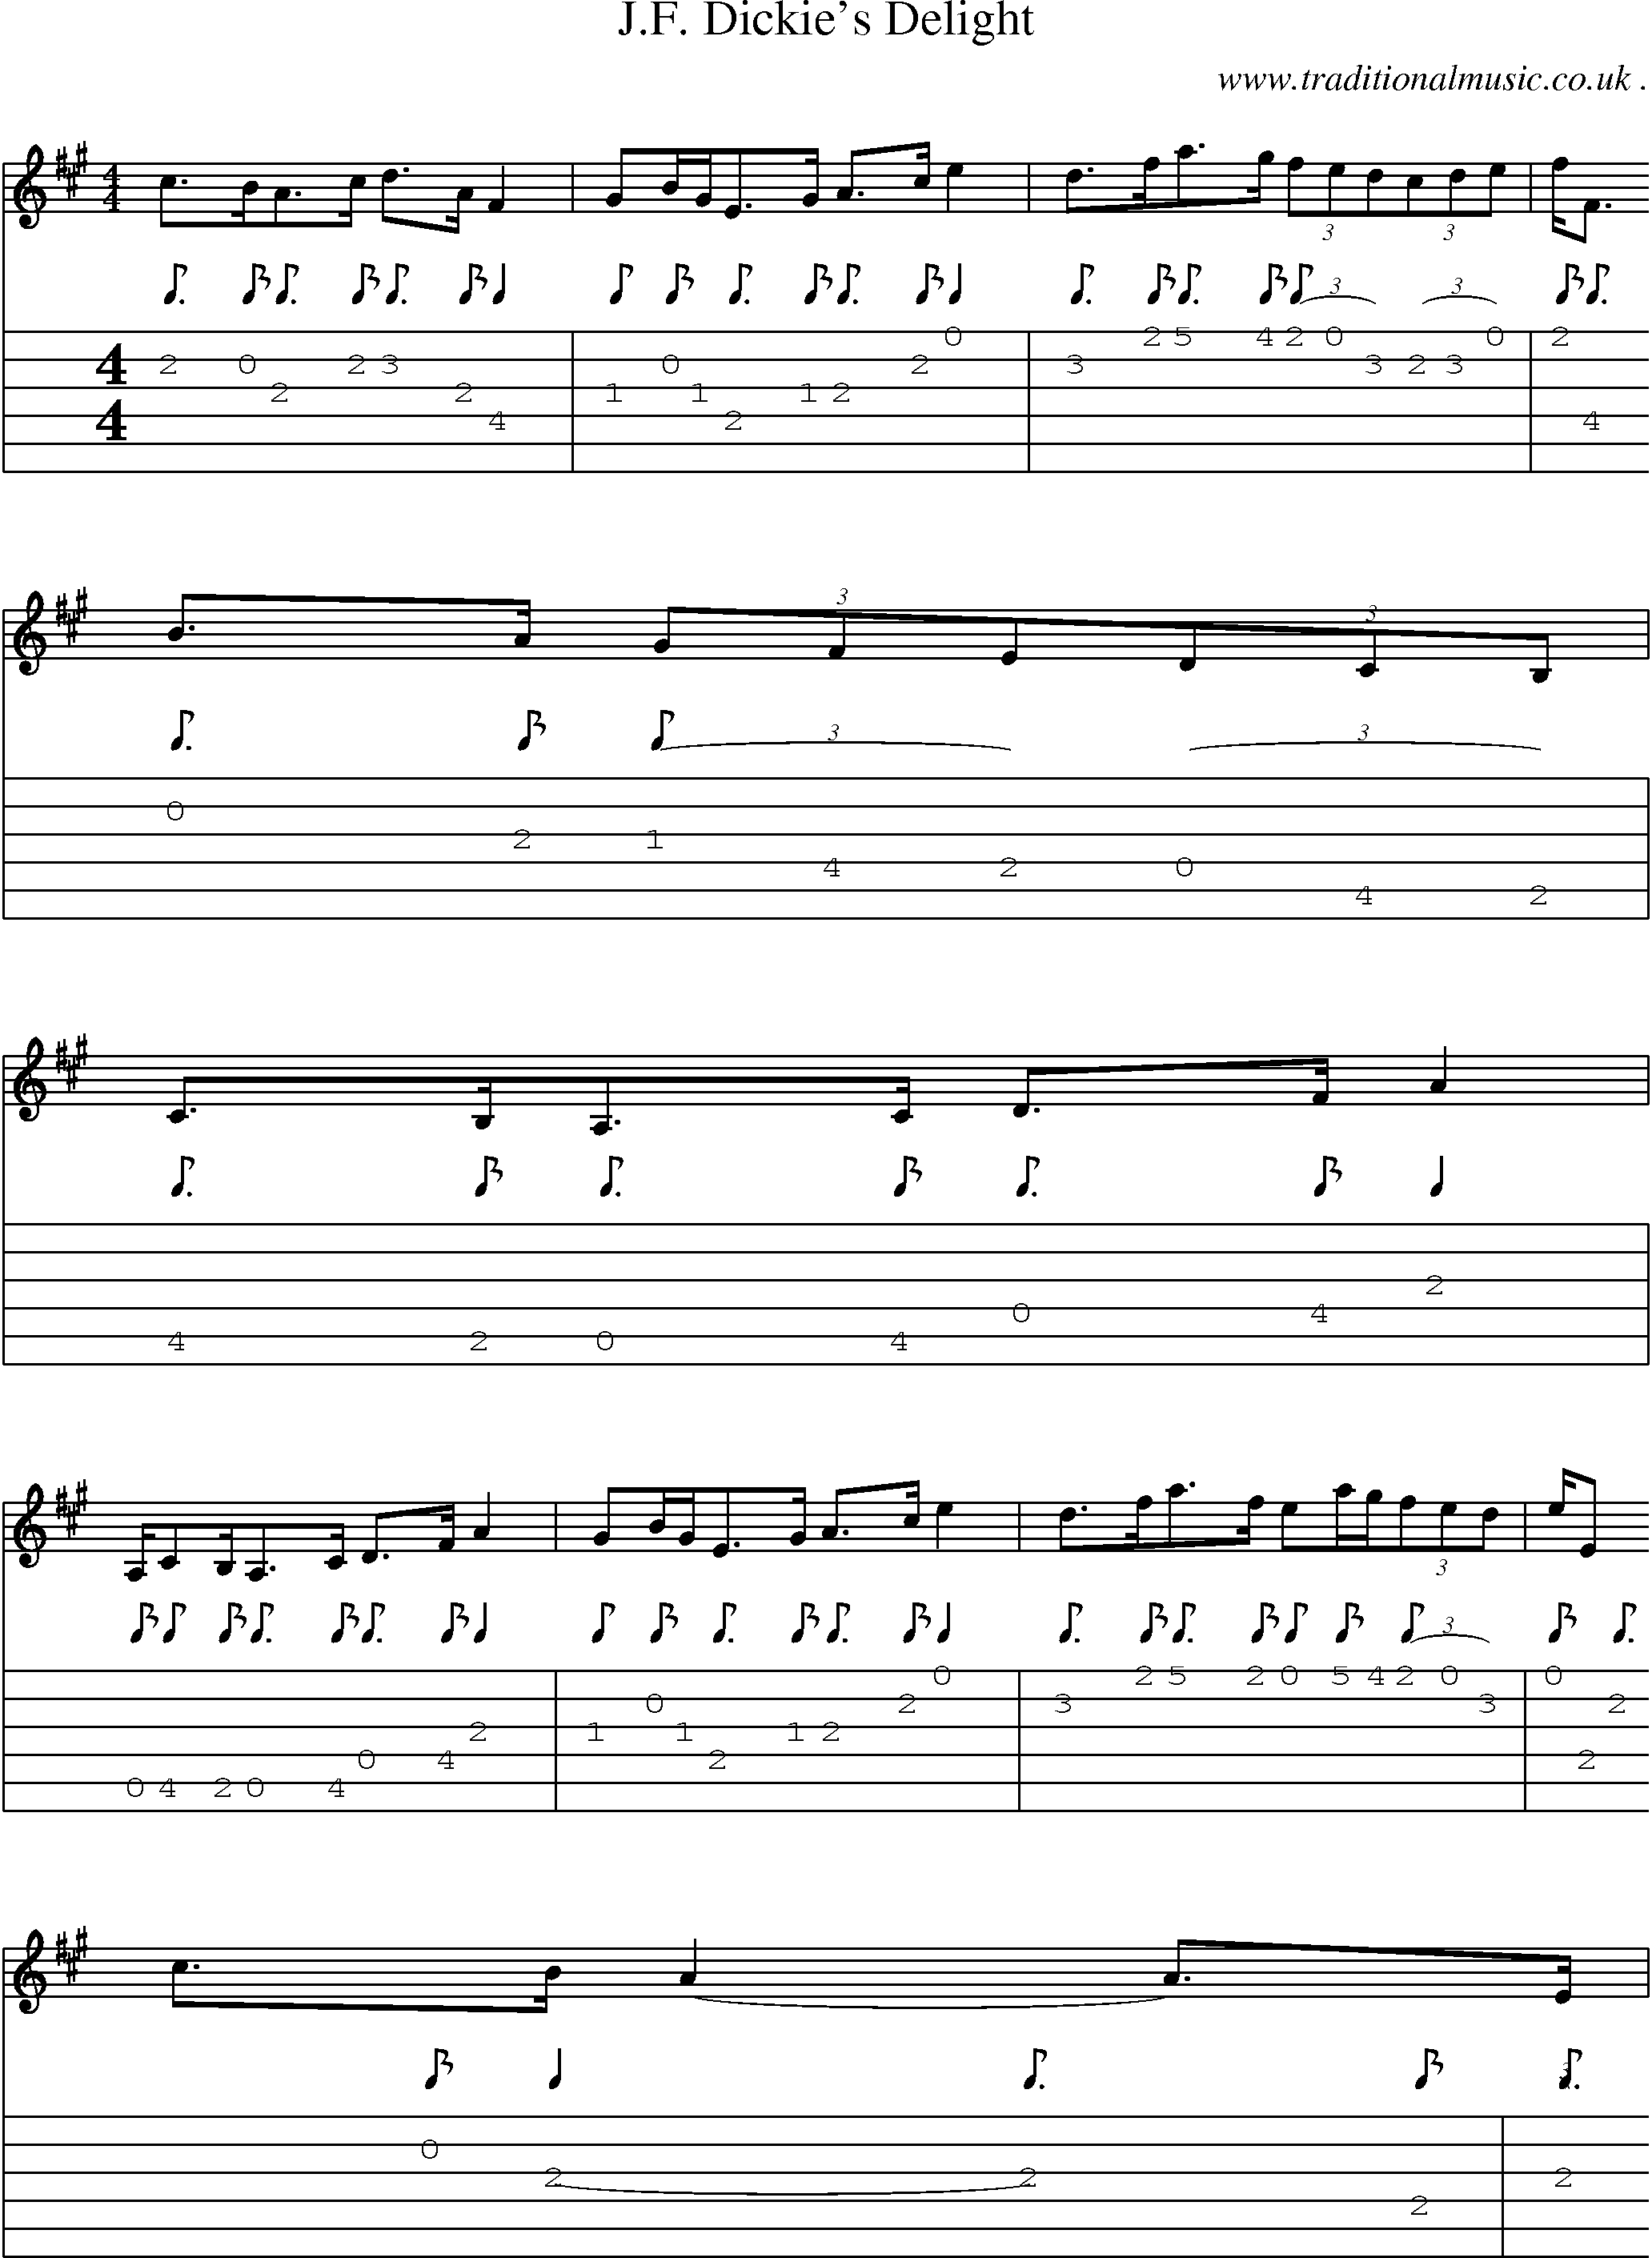 Sheet-Music and Guitar Tabs for Jf Dickies Delight